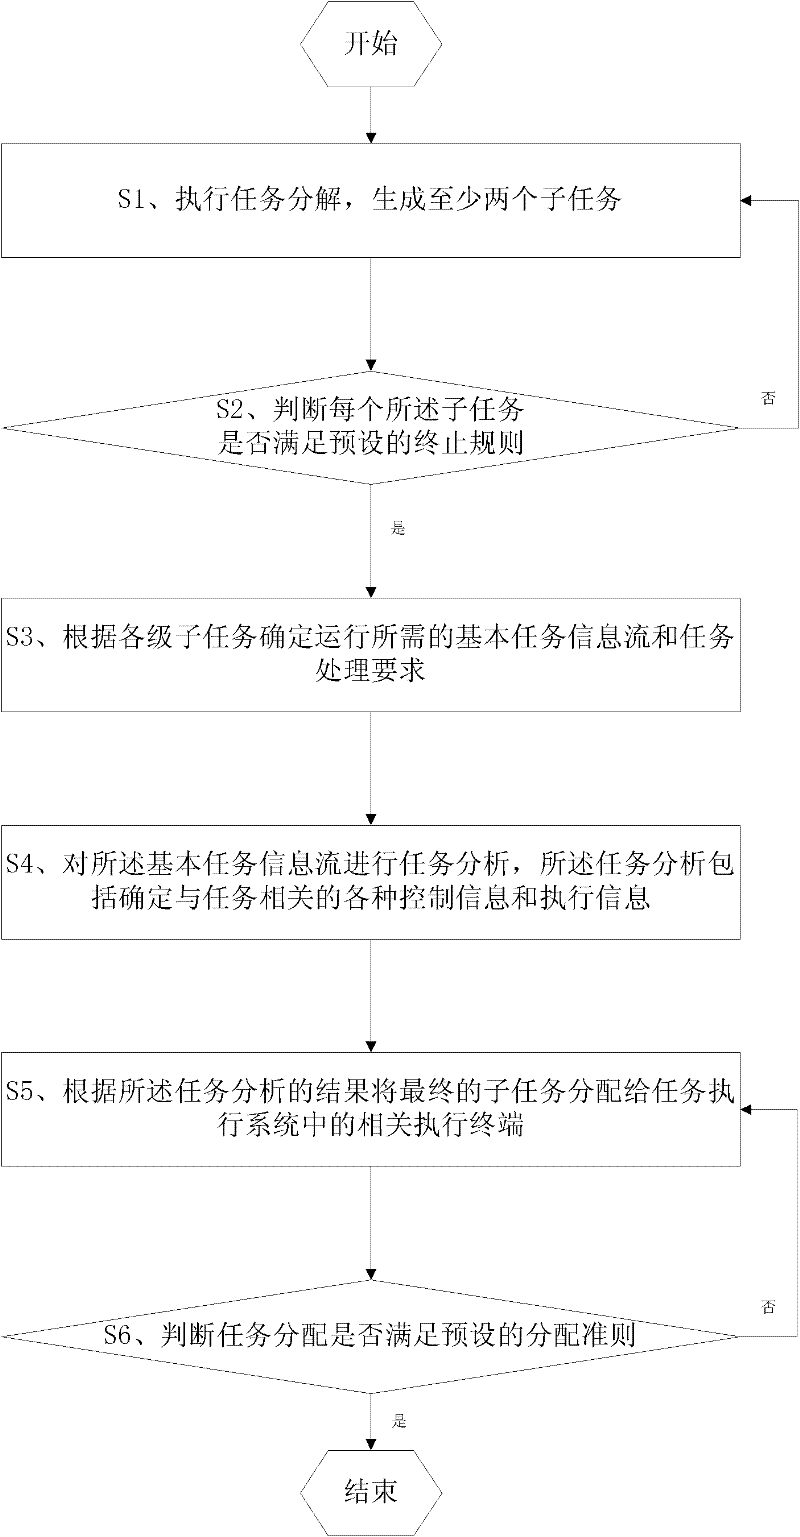 Control method and system thereof of nuclear power plant operation